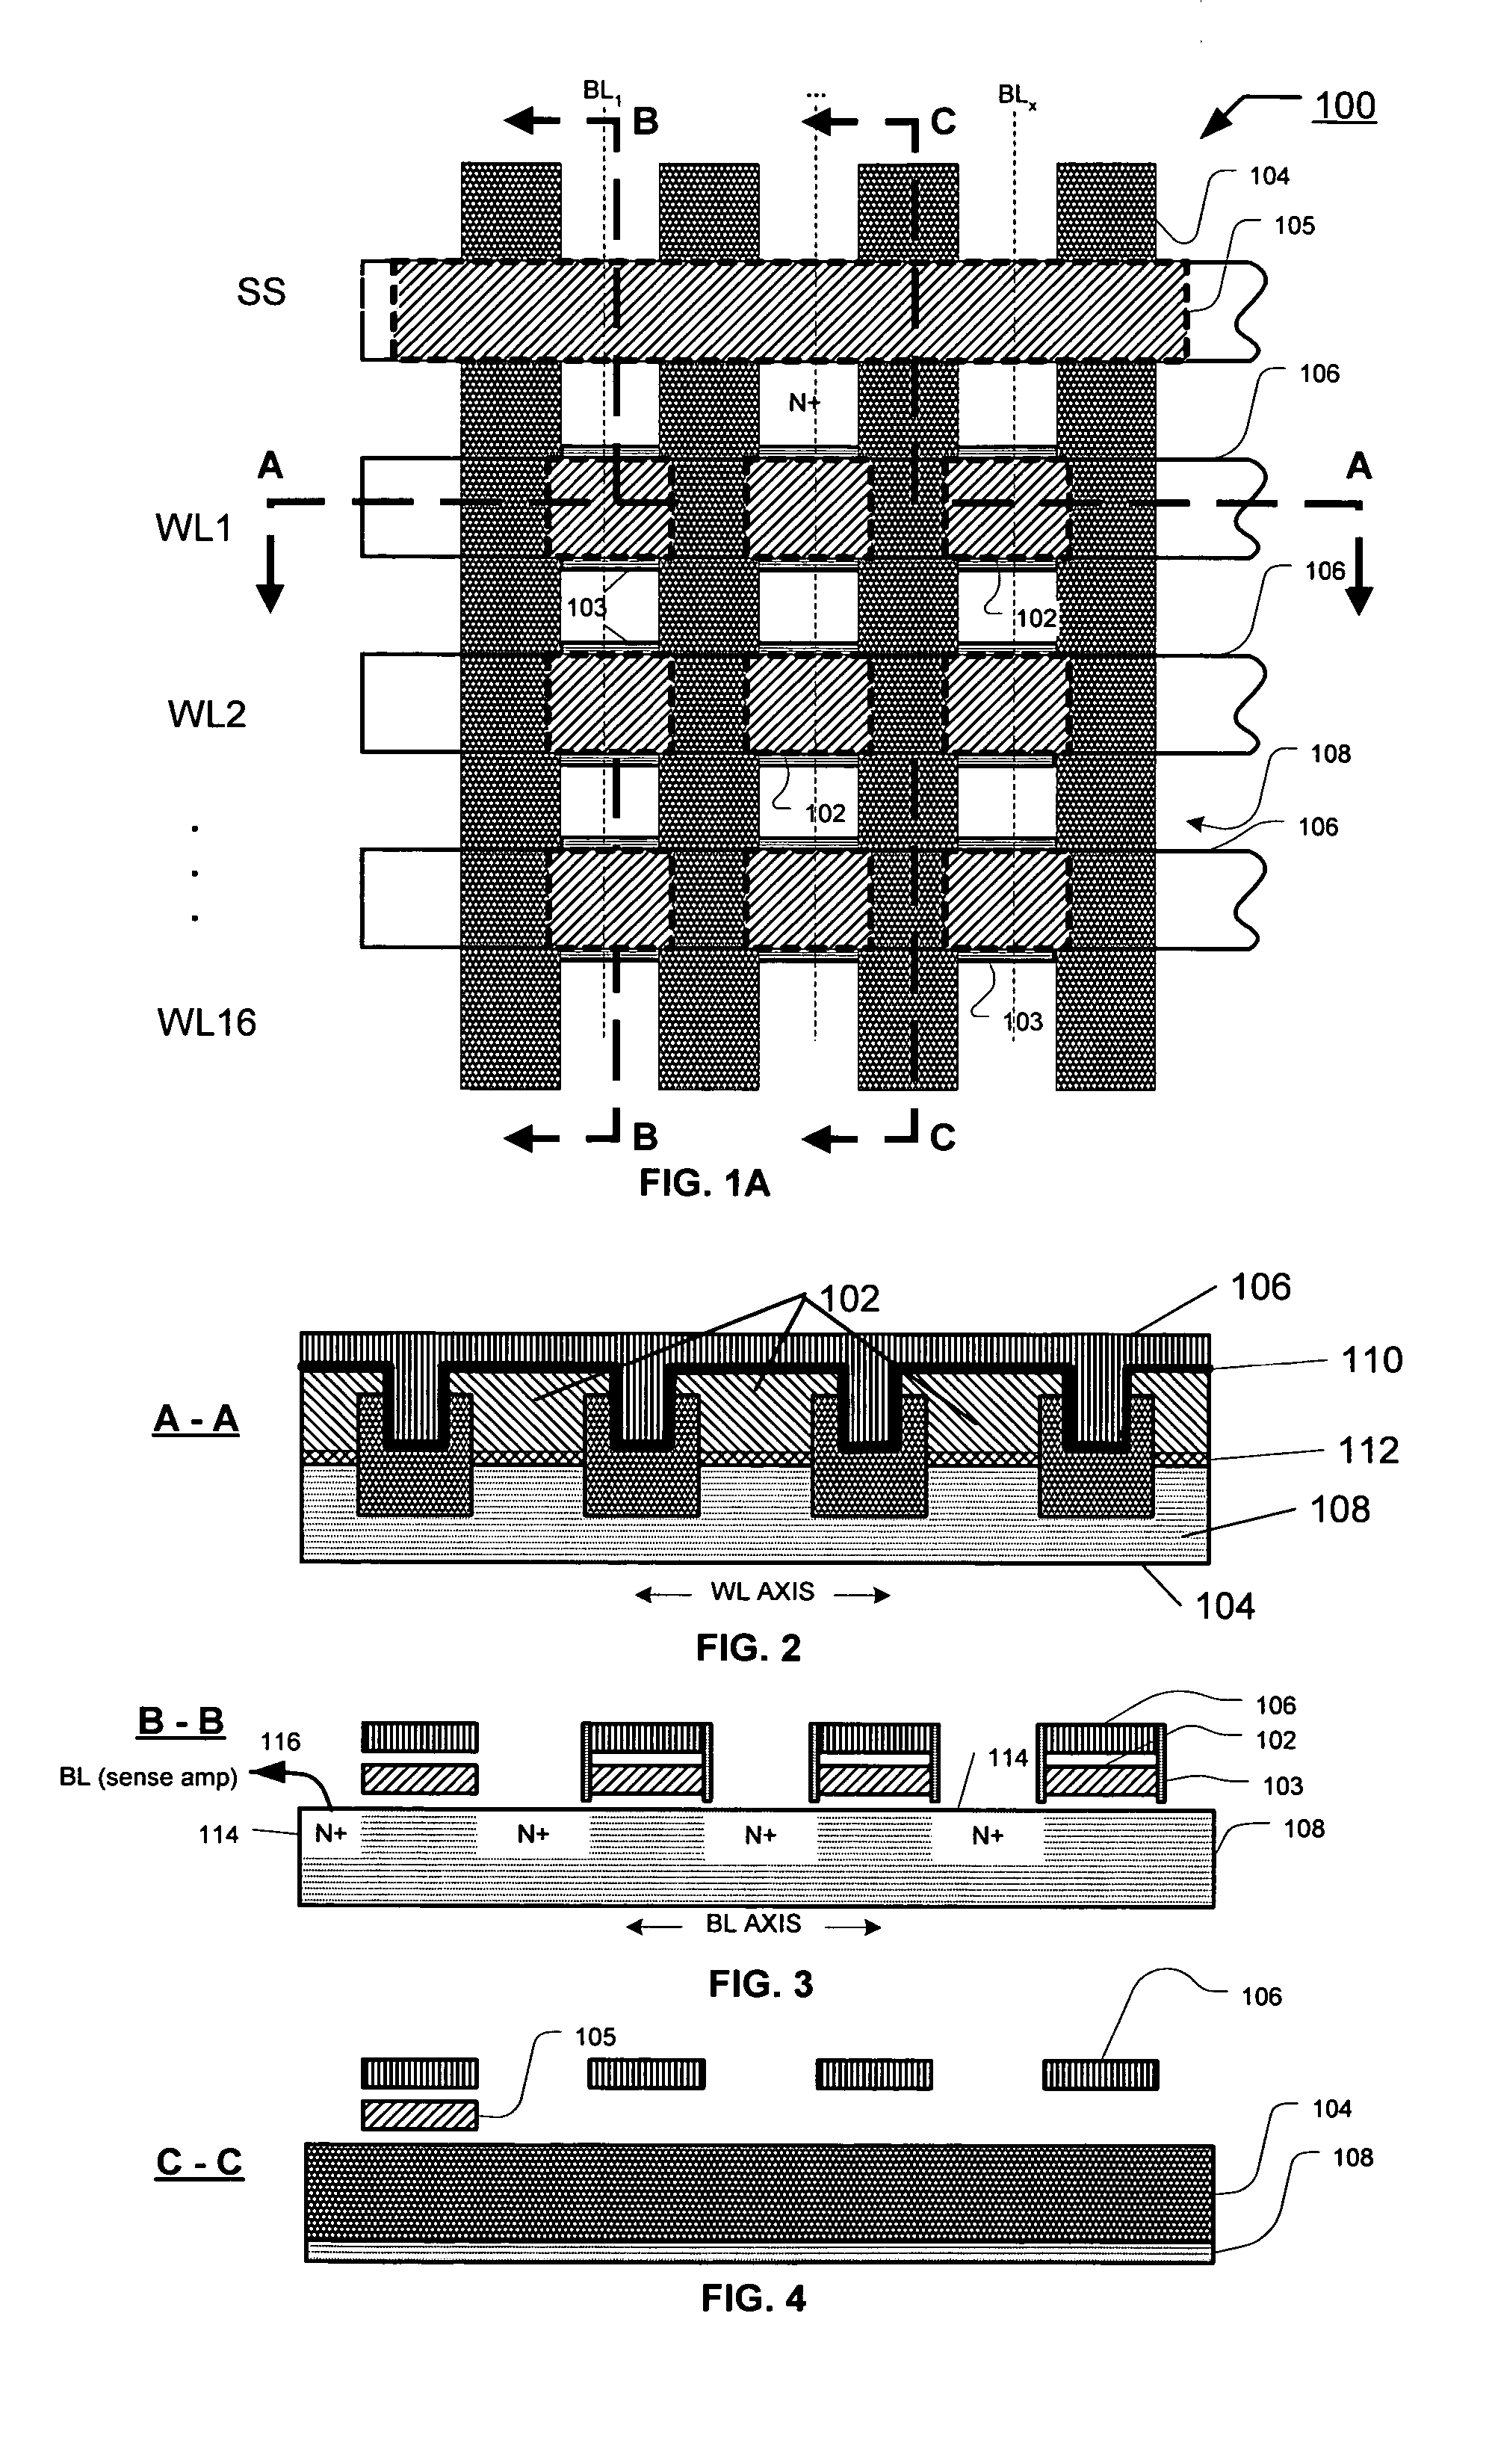 Bitline direction shielding to avoid cross coupling between adjacent cells for NAND flash memory